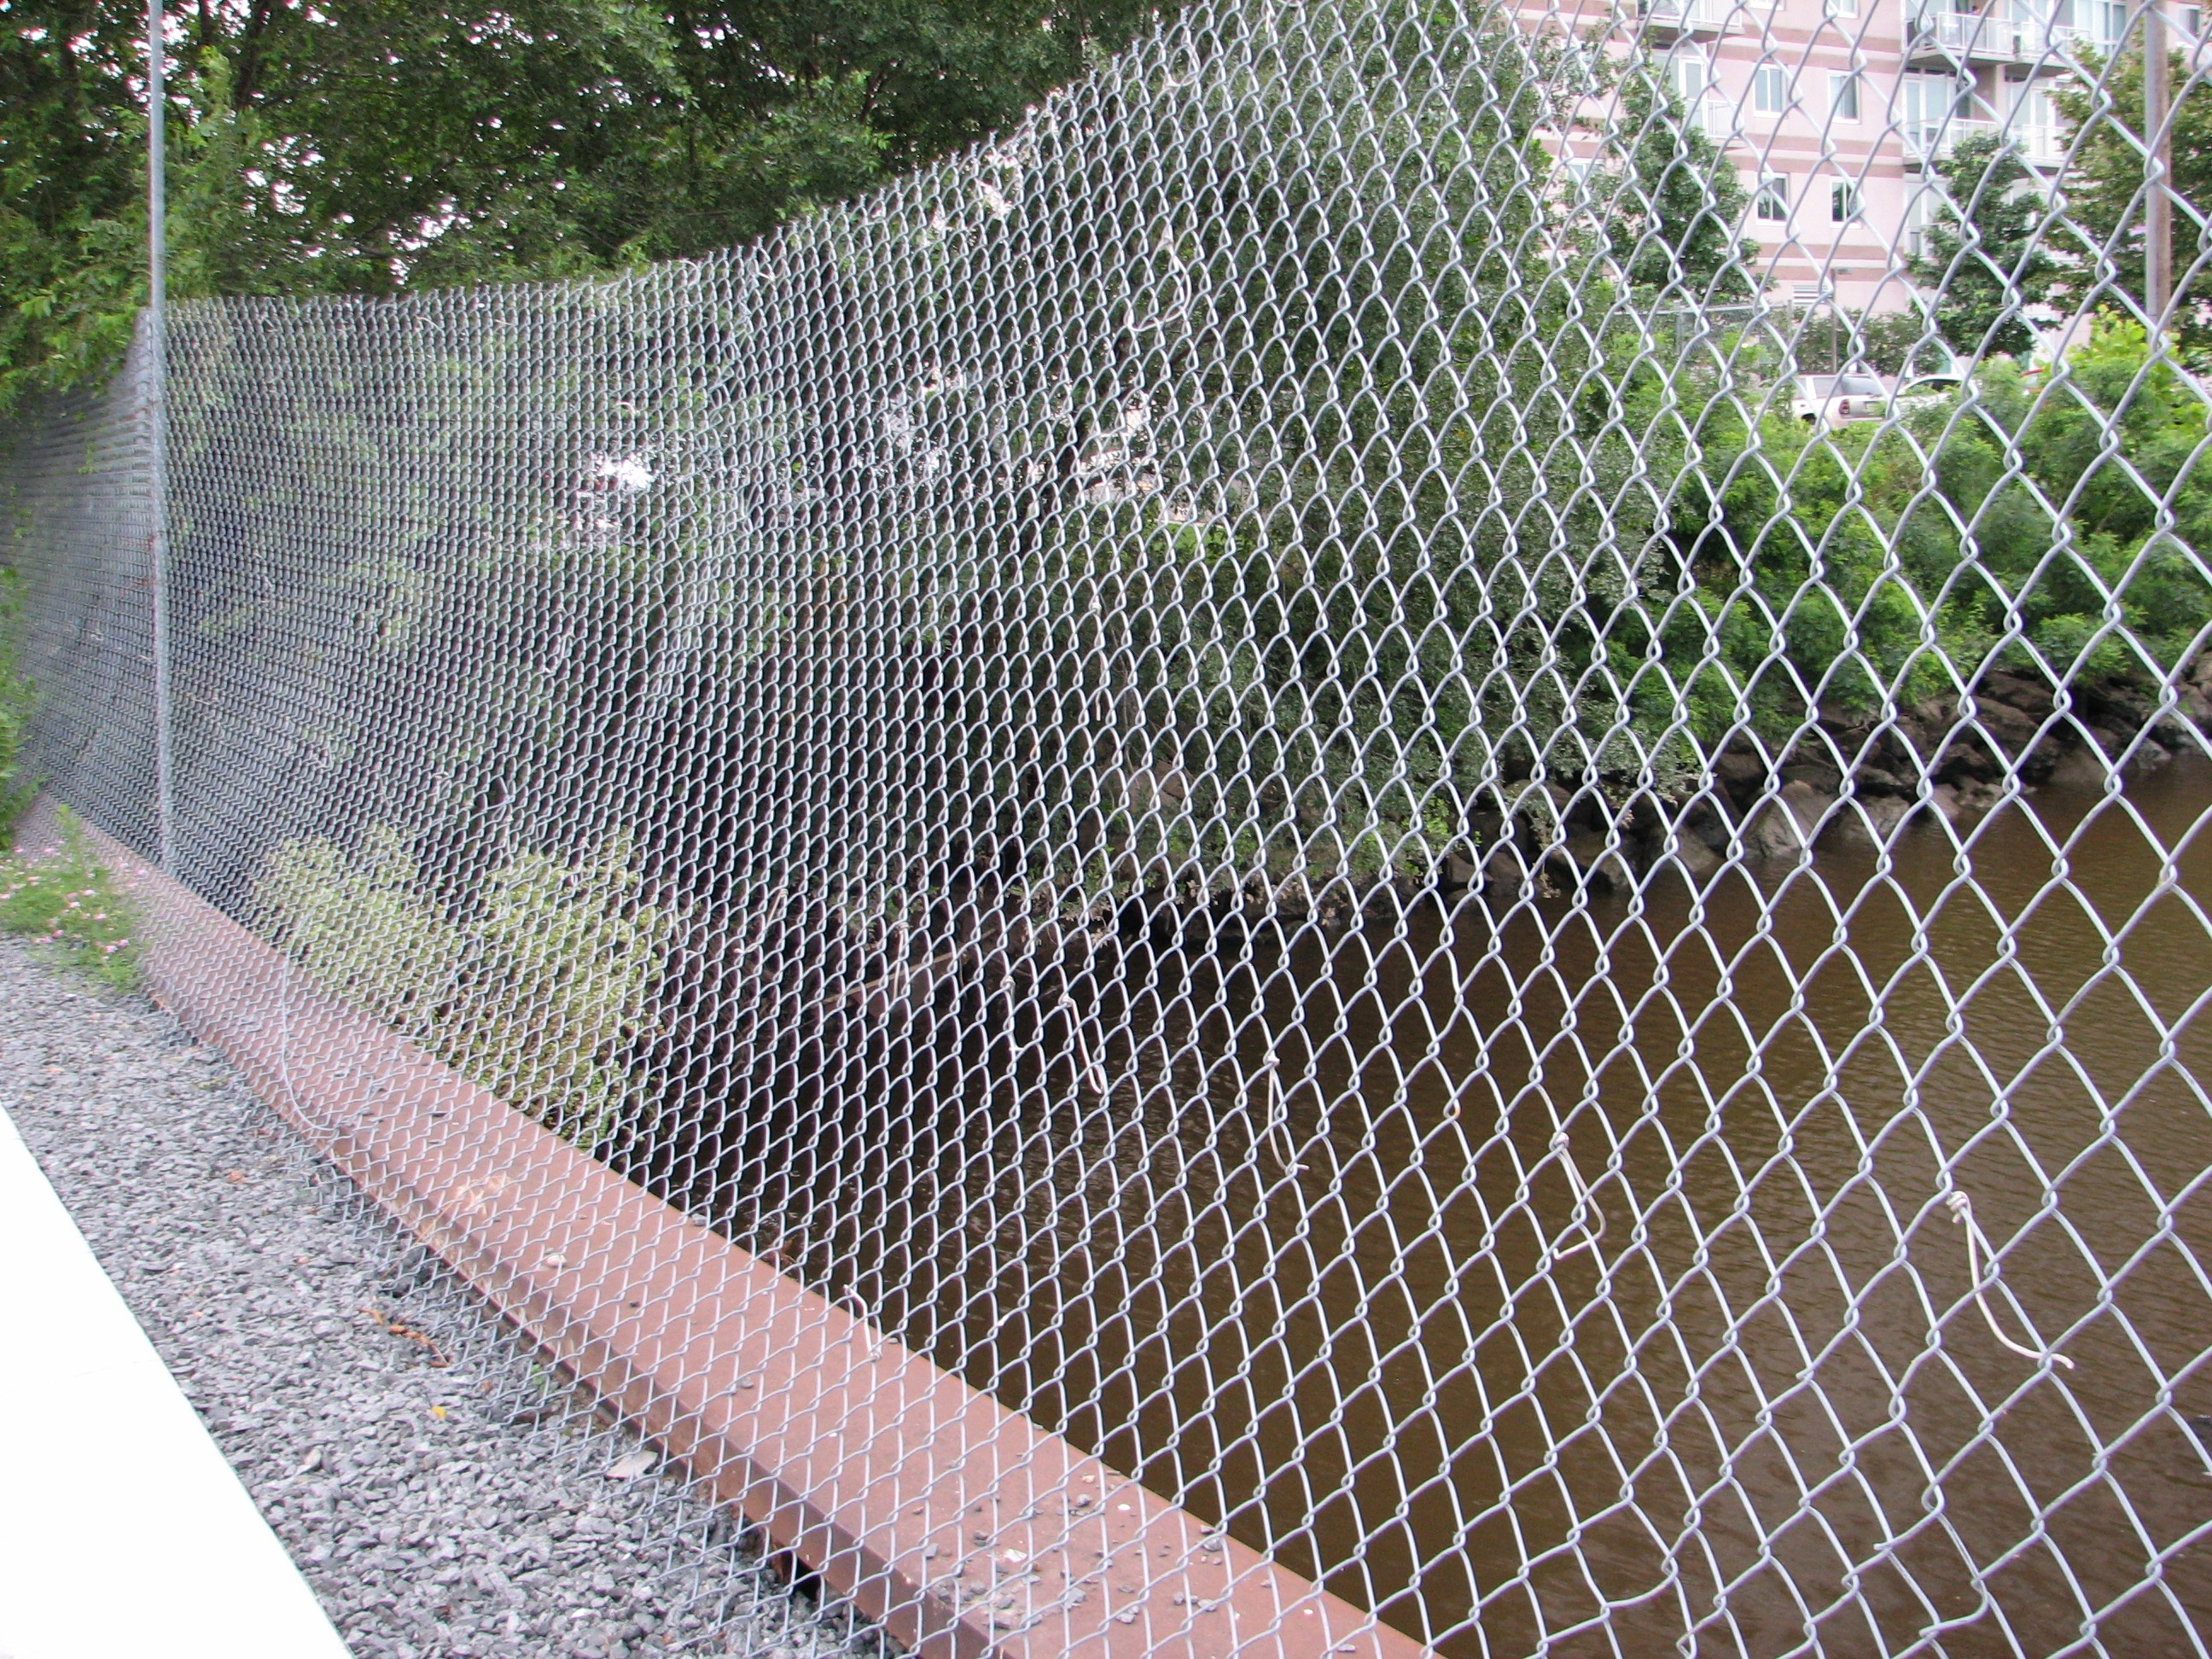 A loose chainlink fence along an inlet